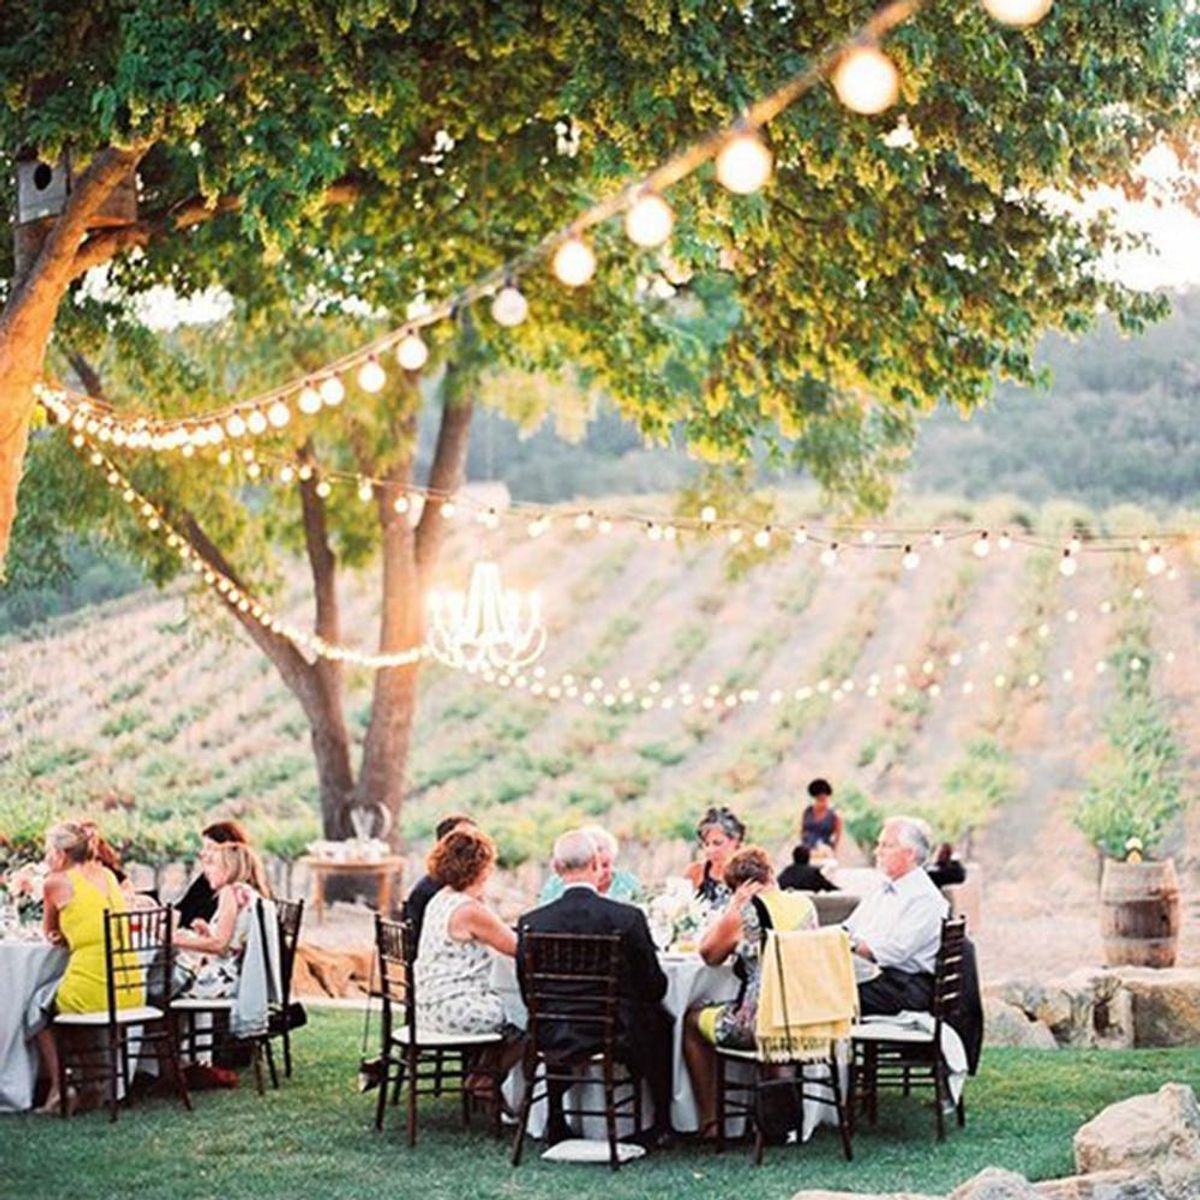 Families gather at tables strung with lights with hills behind at this California vineyard wedding venue.